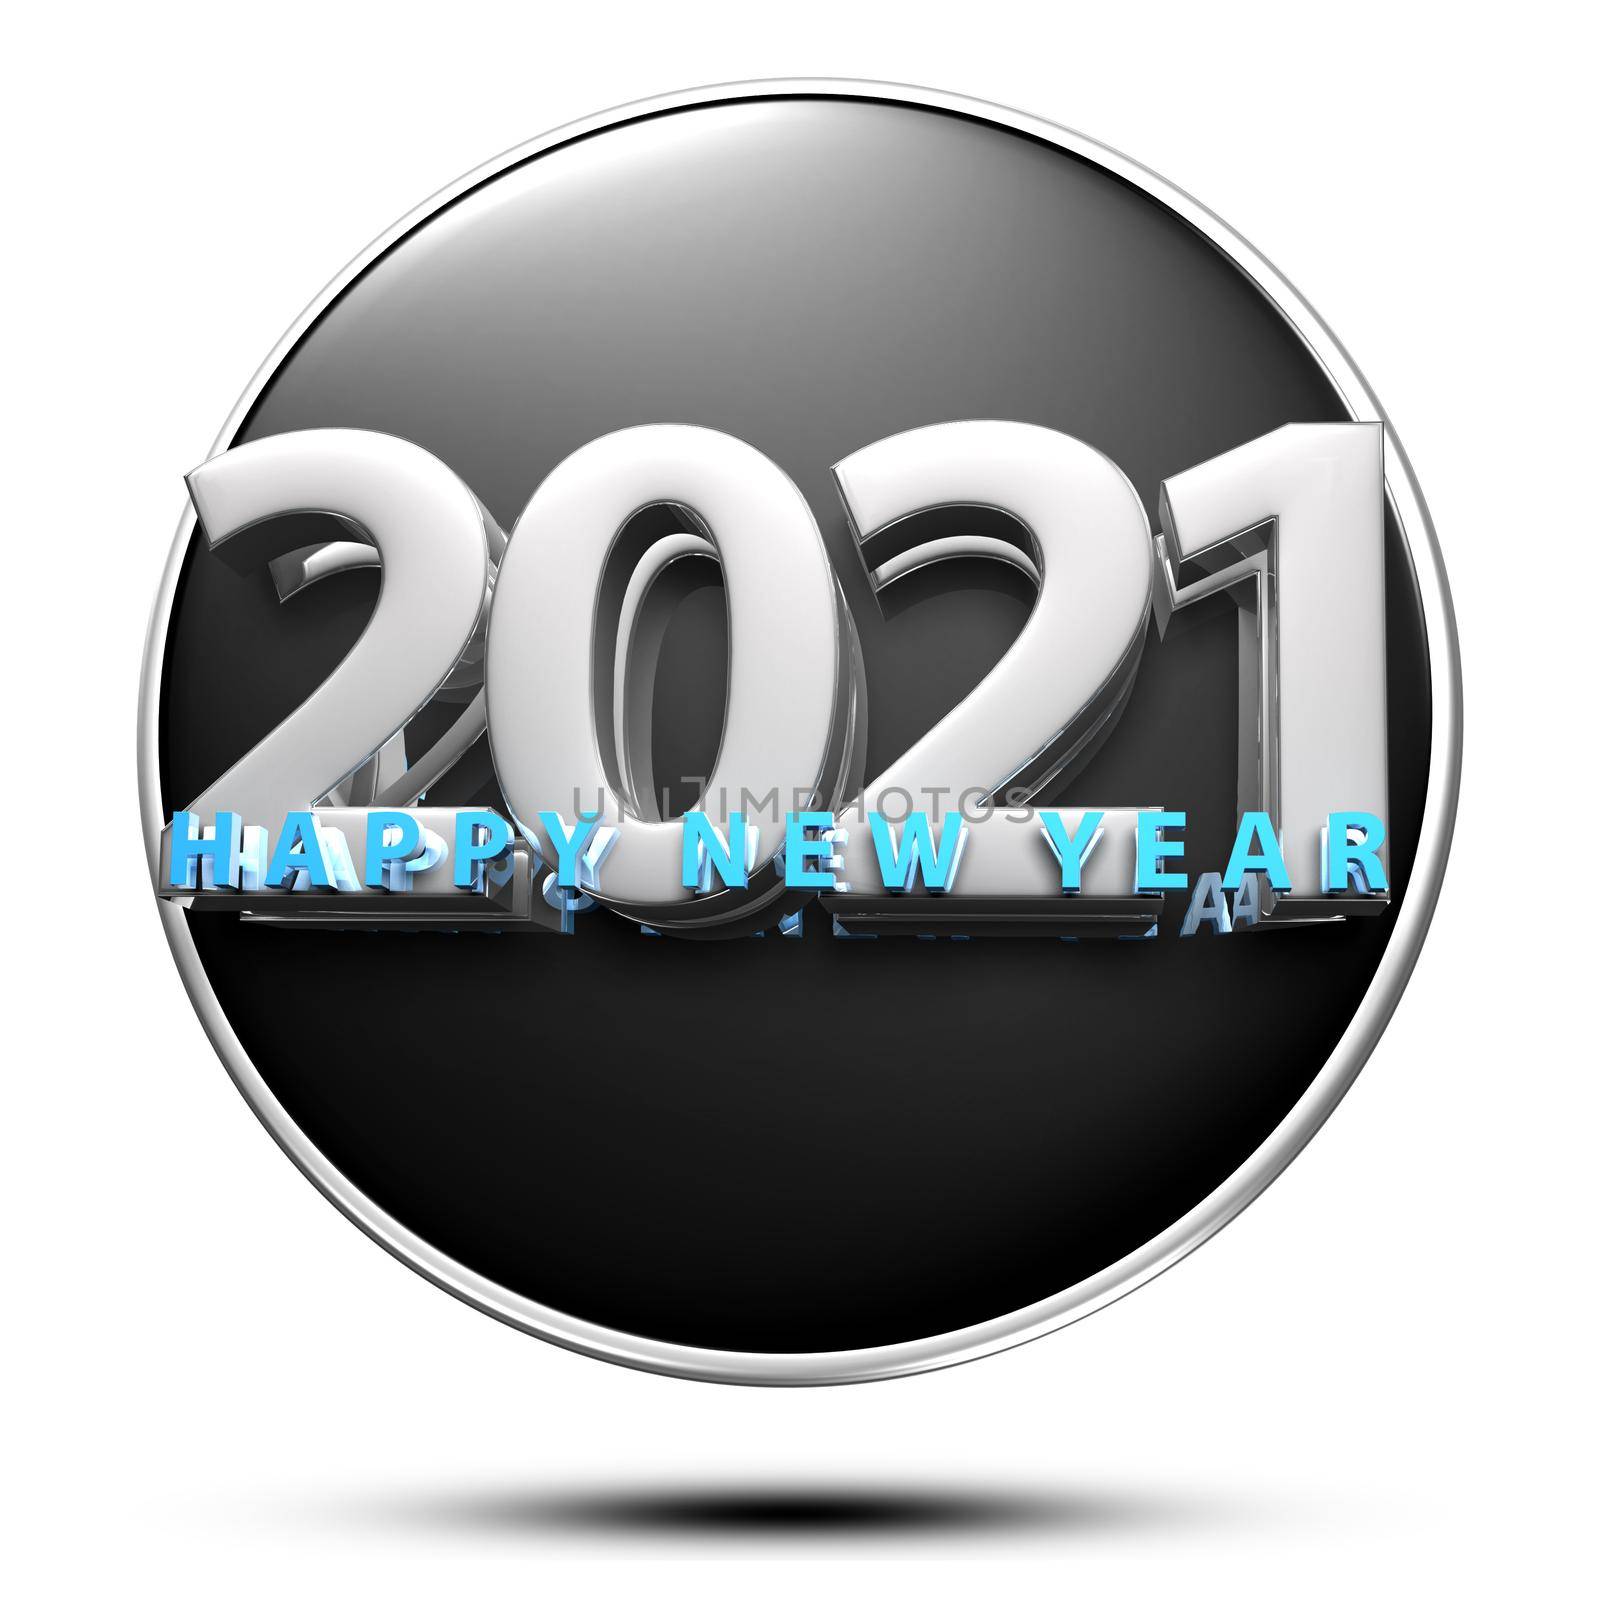 Happy new year 2021 isolated on white background illustration 3D rendering with Clipping Path. by thitimontoyai